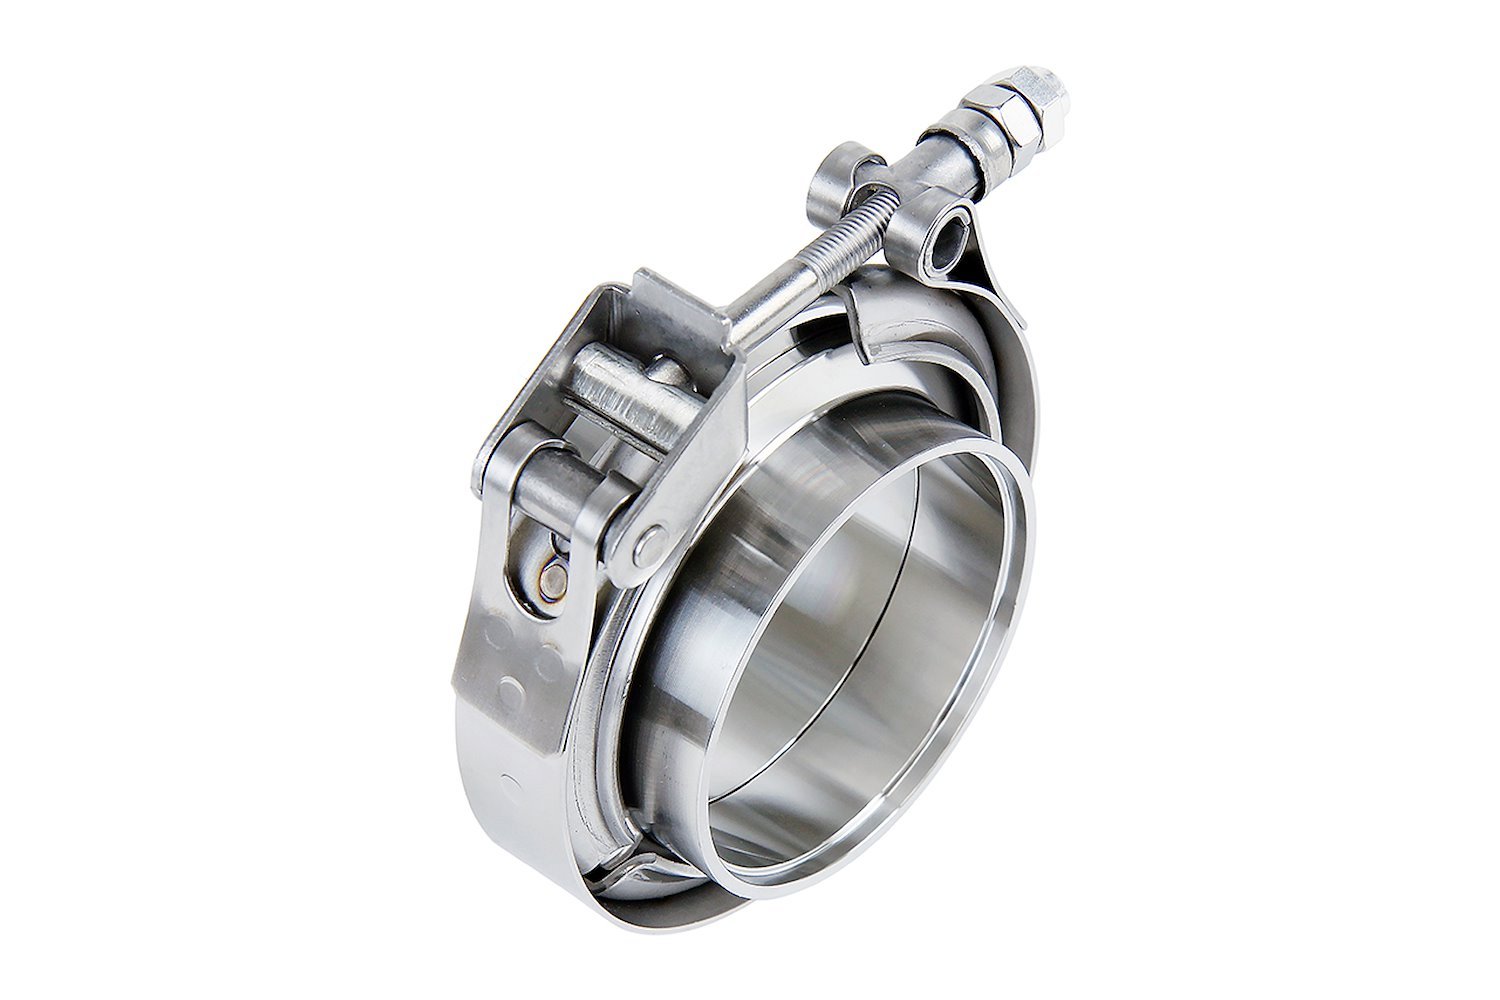 VCKIT-SS-300 V-Band Clamp w/ Interlocking Stainless Steel Flanges, For 3 in. OD Tubing.